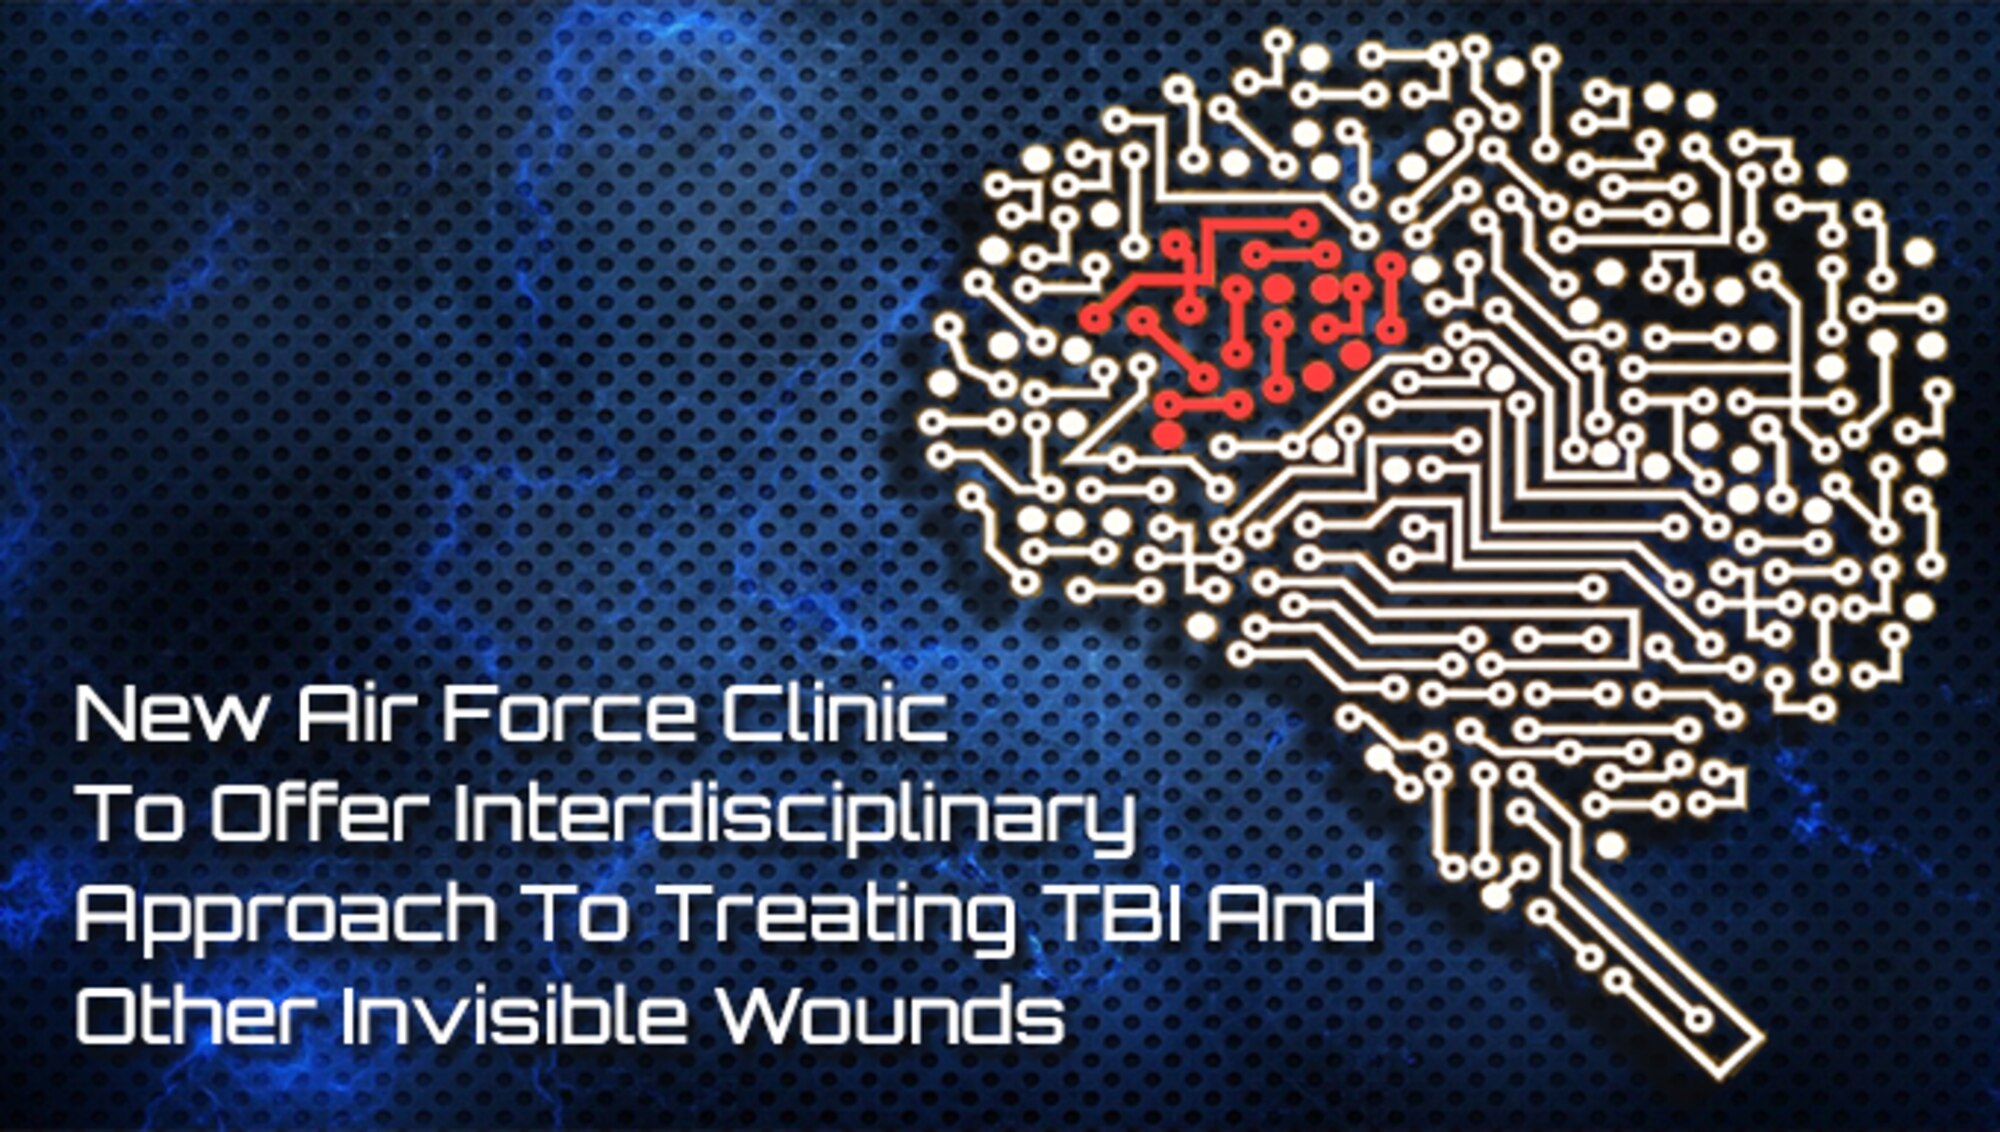 The Air Force is looking to open a new Invisible Wounds clinic in 2018. The clinic will take an interdisciplinary approach to treating traumatic brain injury.